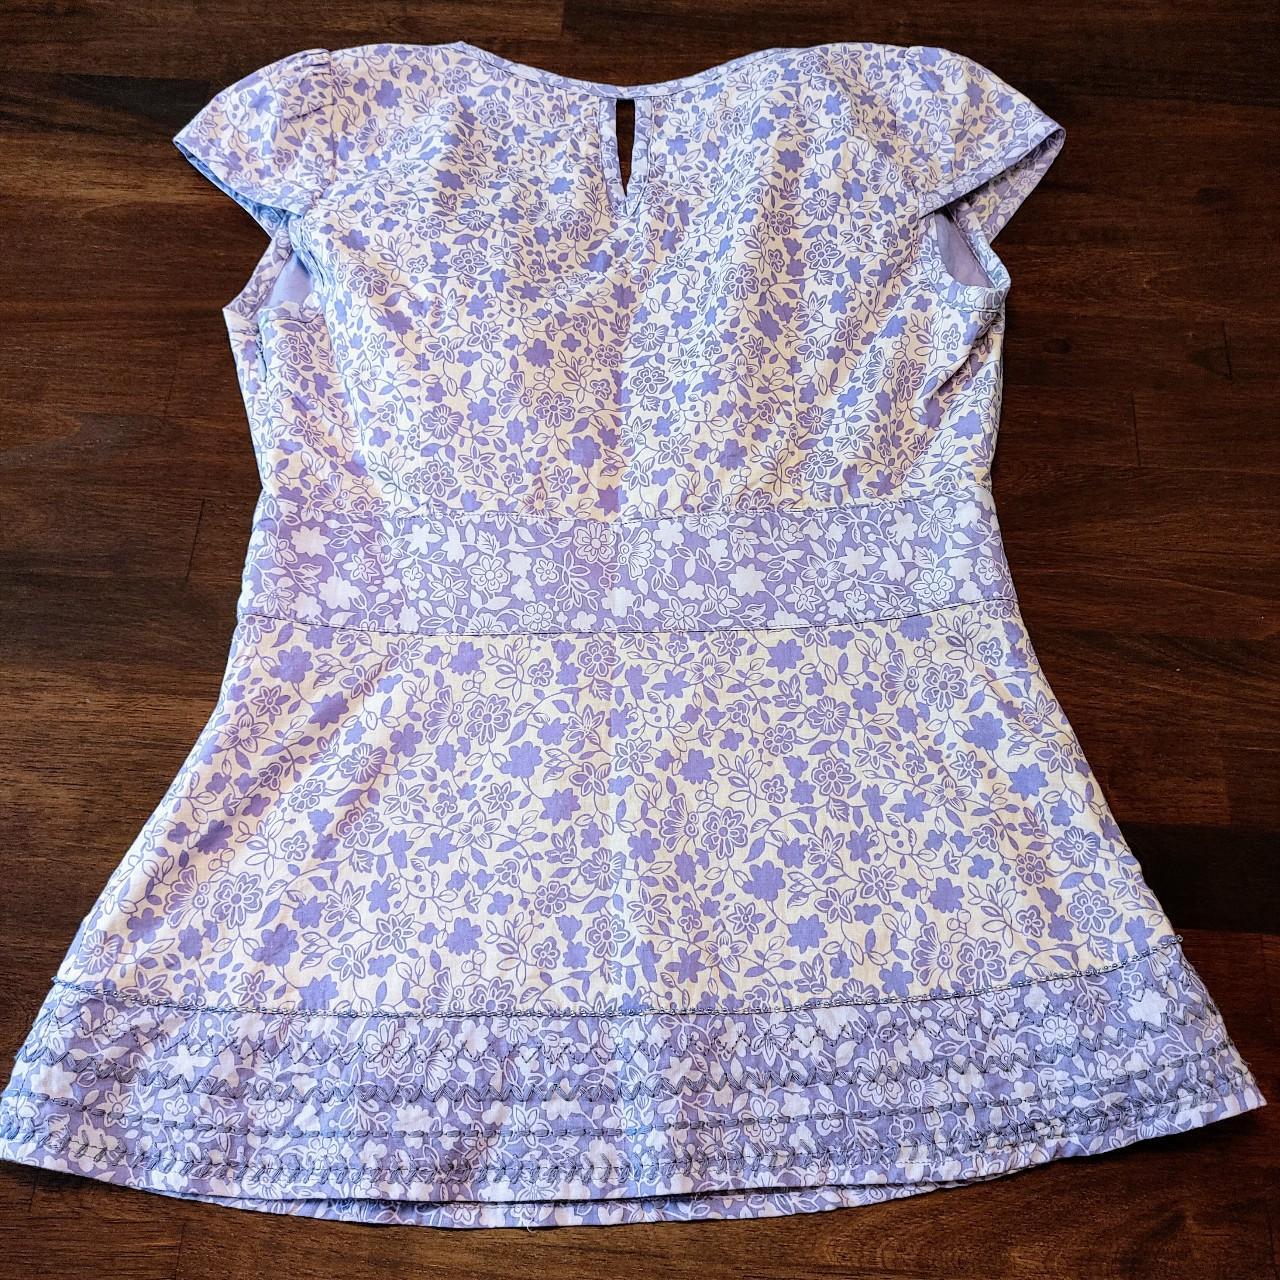 Product Image 2 - Retro floral pattern periwinkle blue